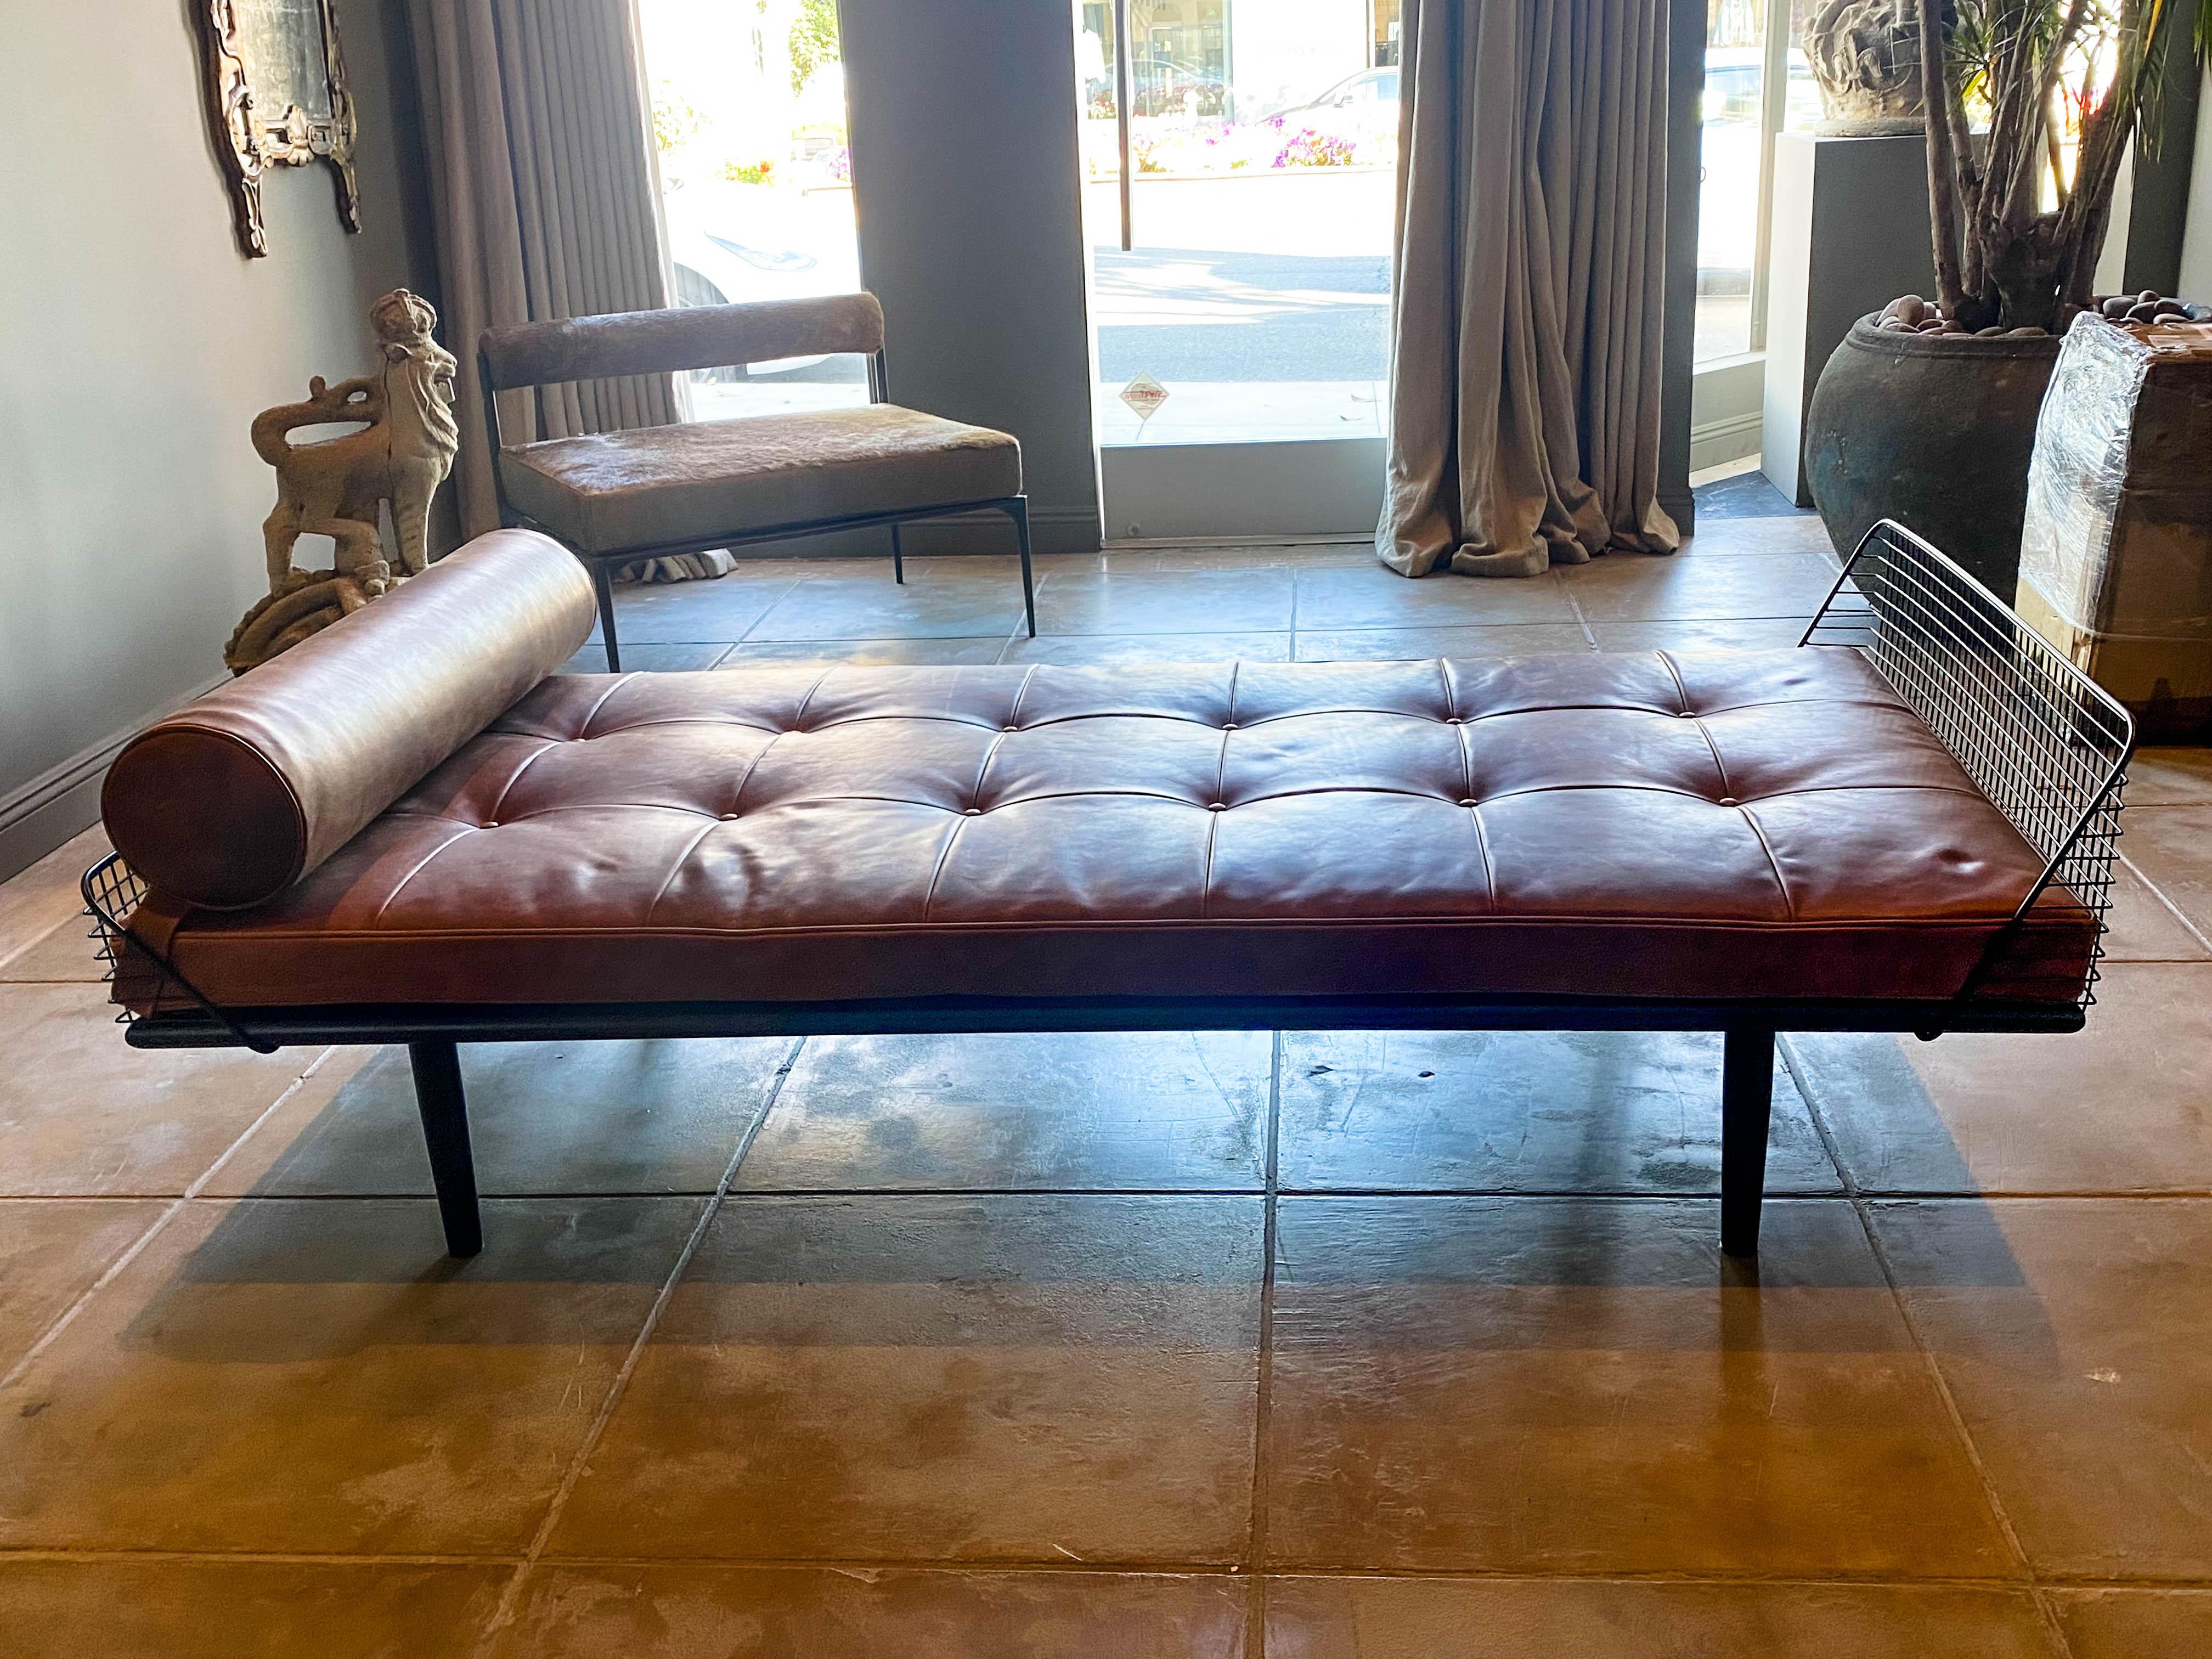 Studio Osklo Daybed 1 in Blackened Steel with Aged Leather Cushion and Bolster In New Condition For Sale In West Hollywood, CA